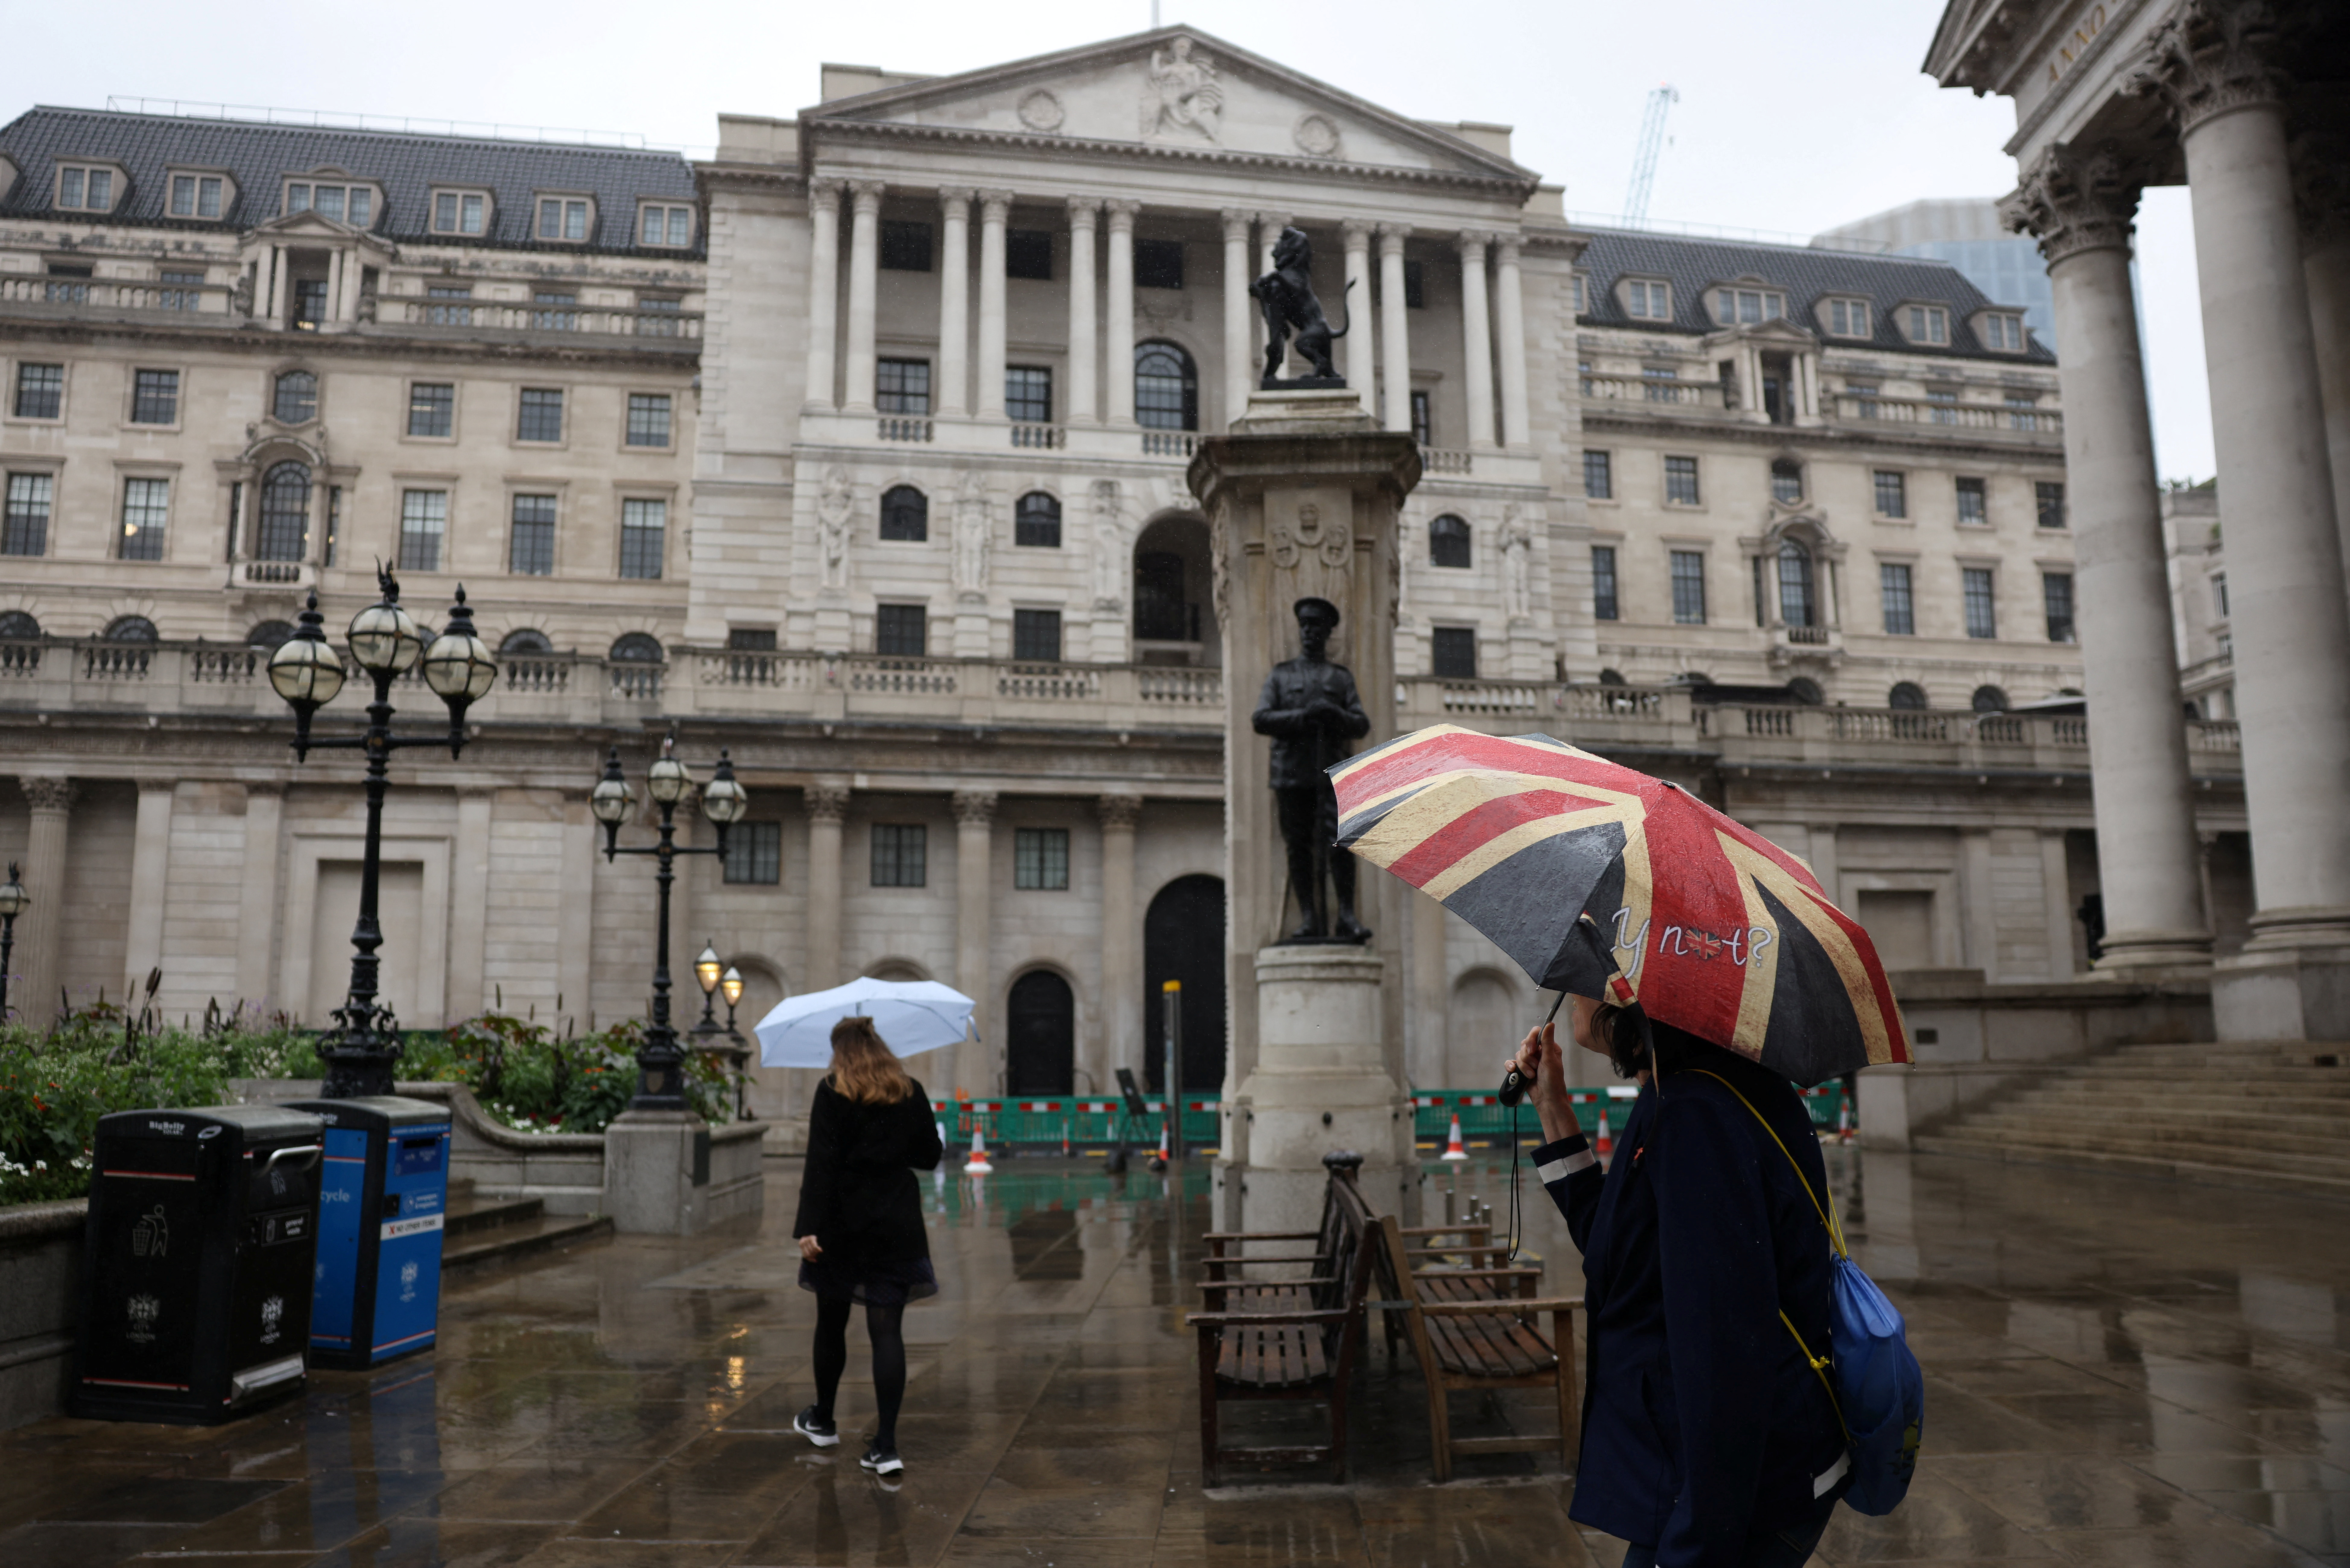 Bank of England in London